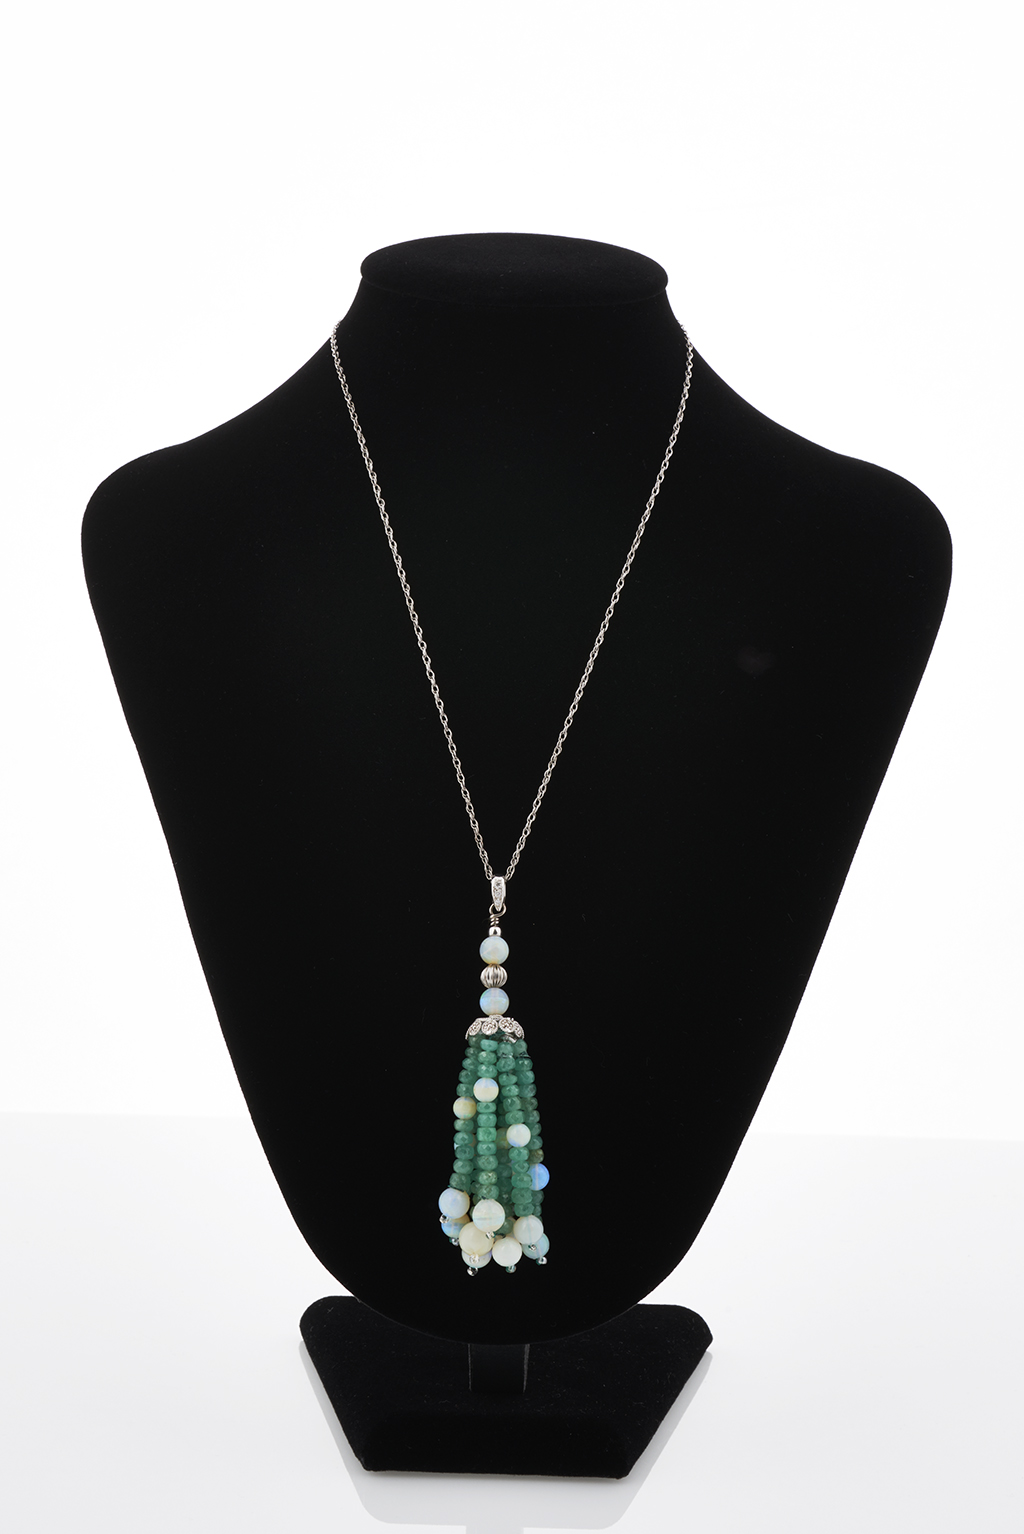 Opal Emerald and Crystal Necklace - Shapiro Auctioneers